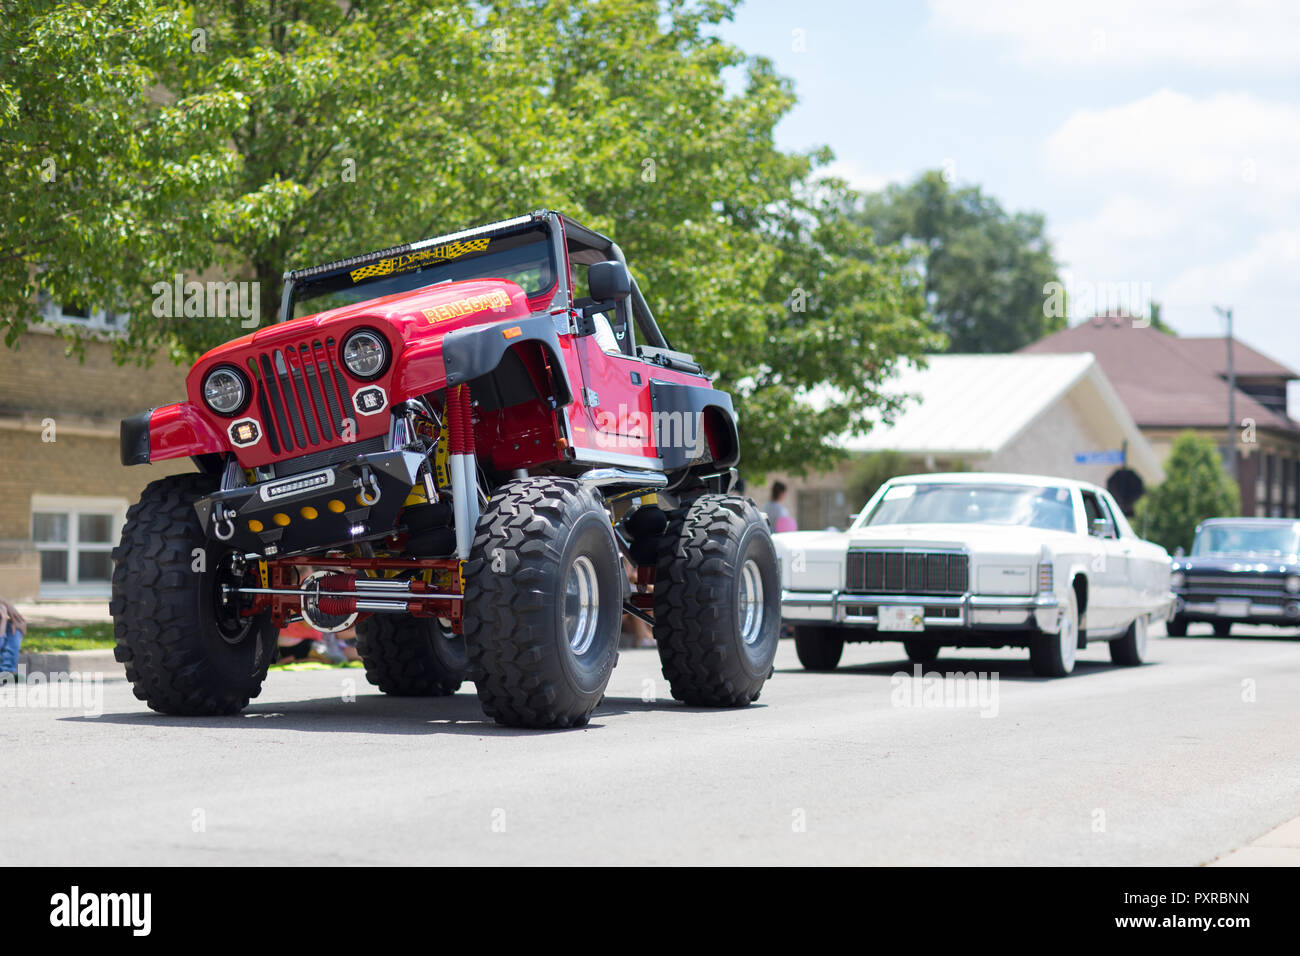 Kokomo, Indiana, USA - June 30, 2018: Haynes Apperson Parade, A Jeep Renegade Modified for off road recreation color red going down the street during  Stock Photo